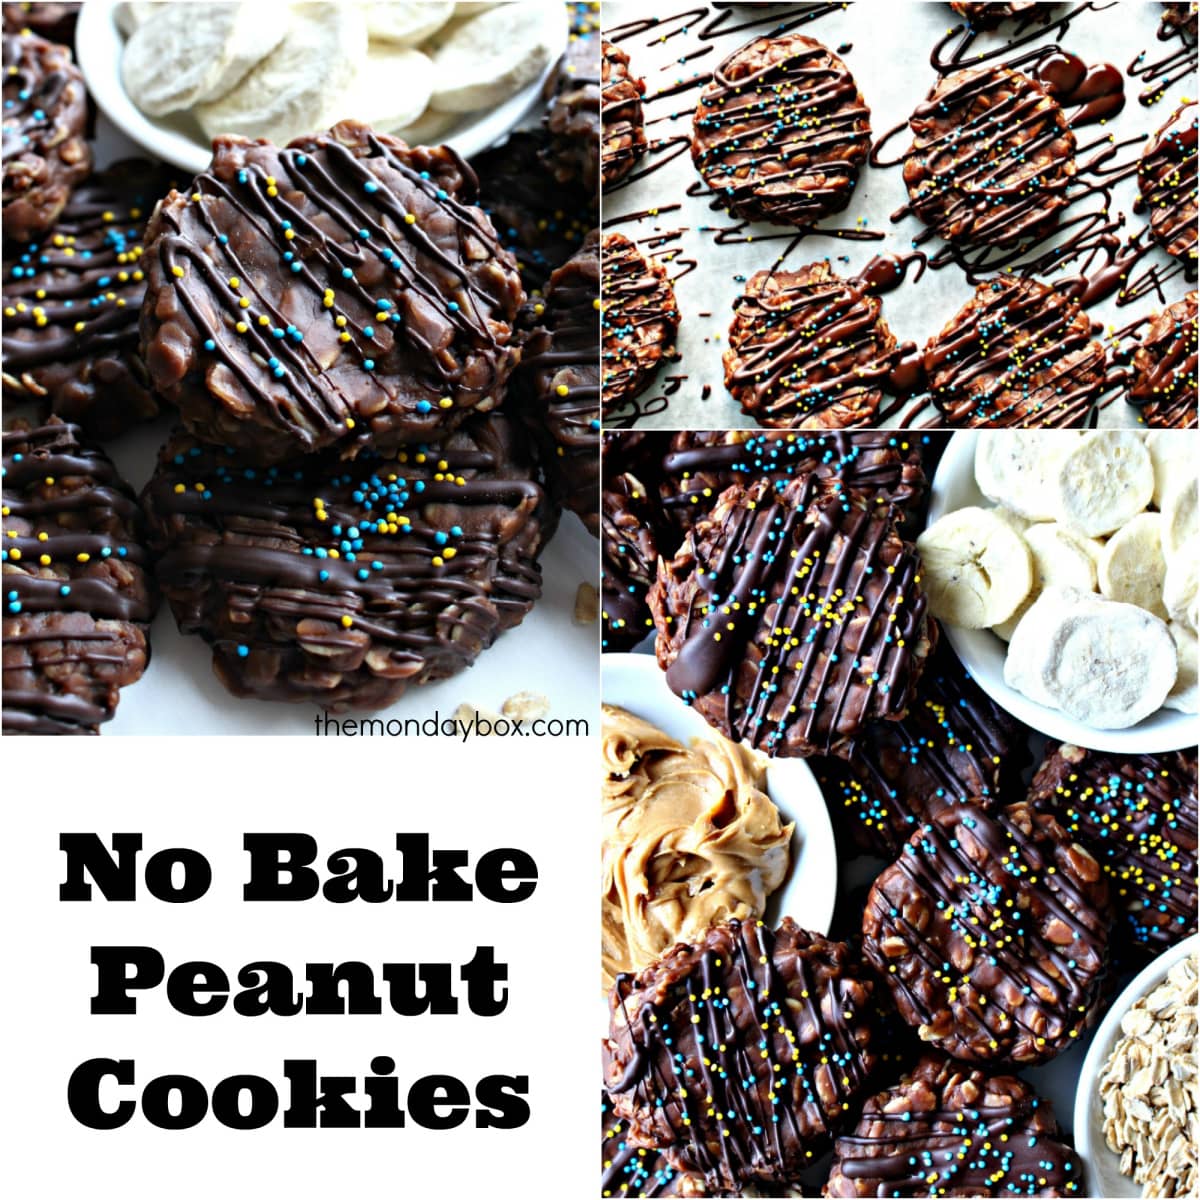 No Bake Peanut Cookies collage showing Chocolate Peanut Butter Banana Cookies.